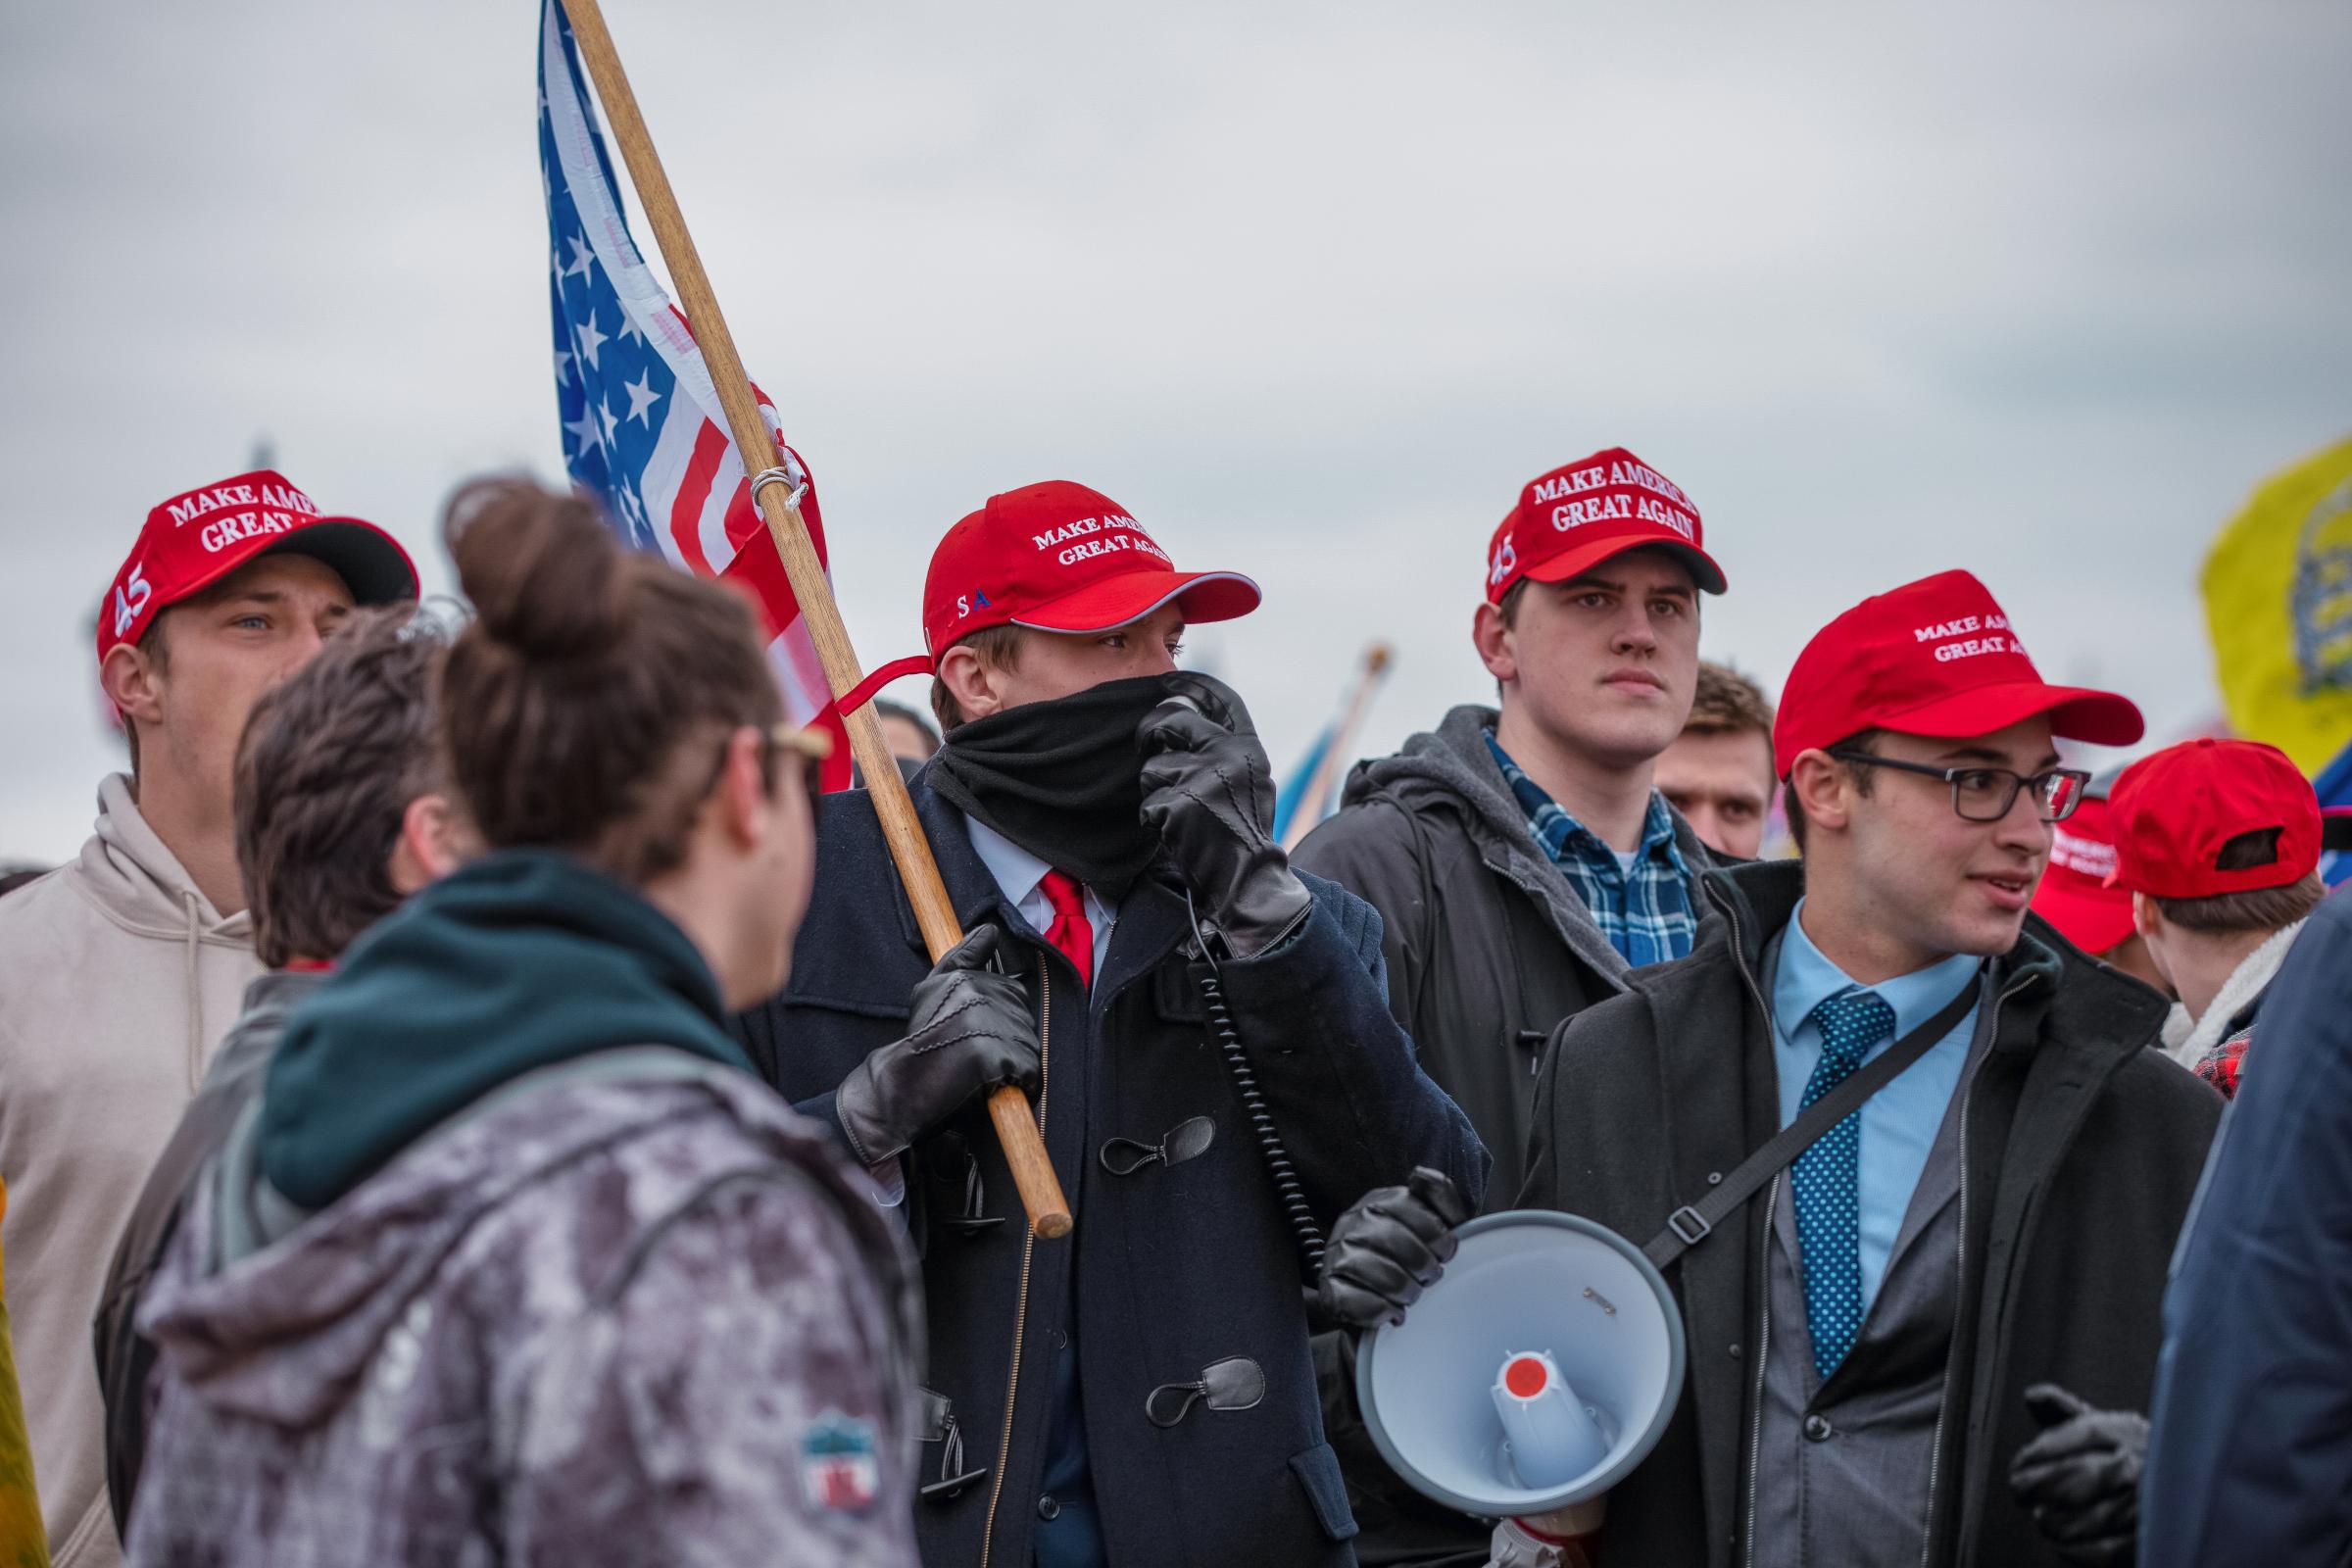 Thousands of Trump's supporters protesting at Washington Monument in support of President...